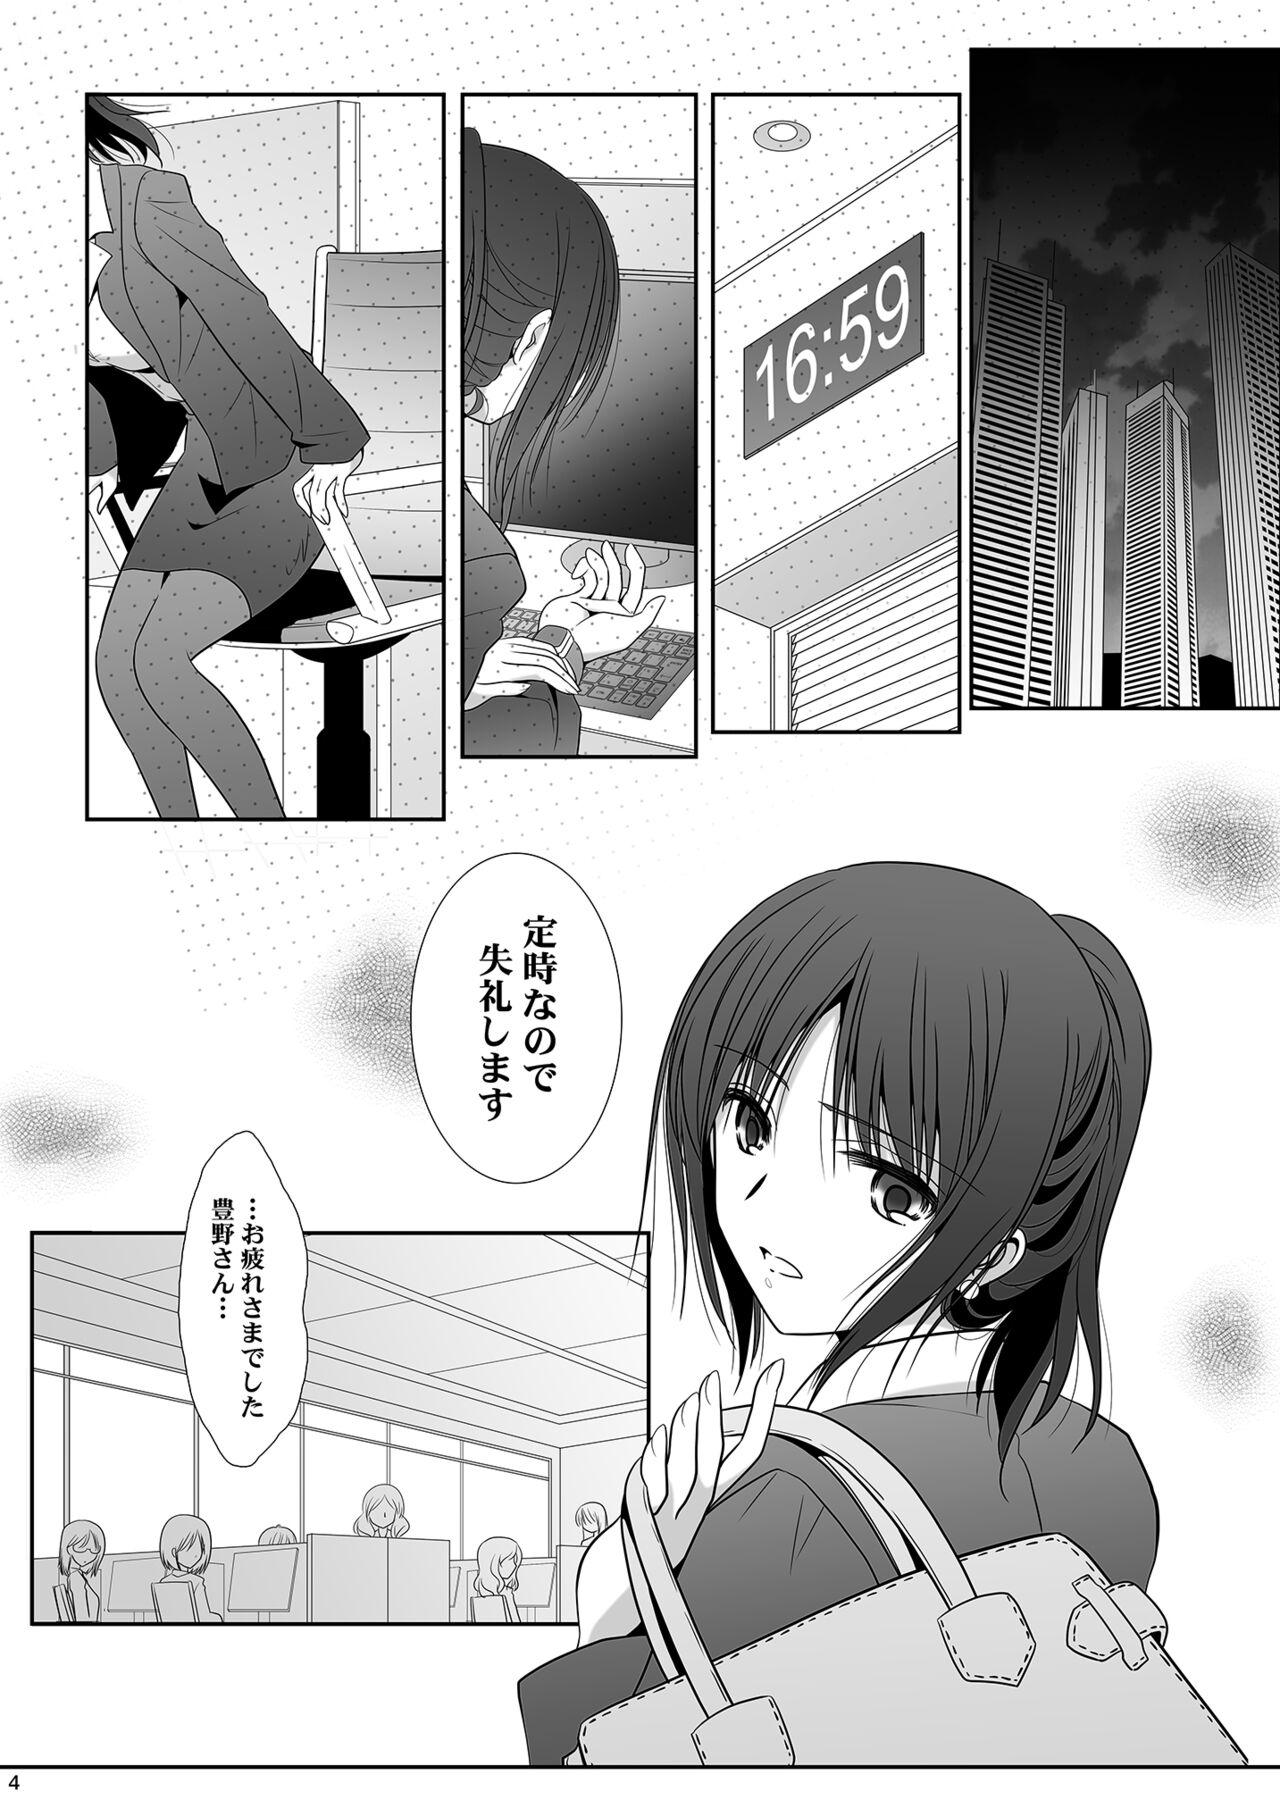 Cutie Toshi no Thirteen - Age Difference is 13 Years - Original Job - Page 4